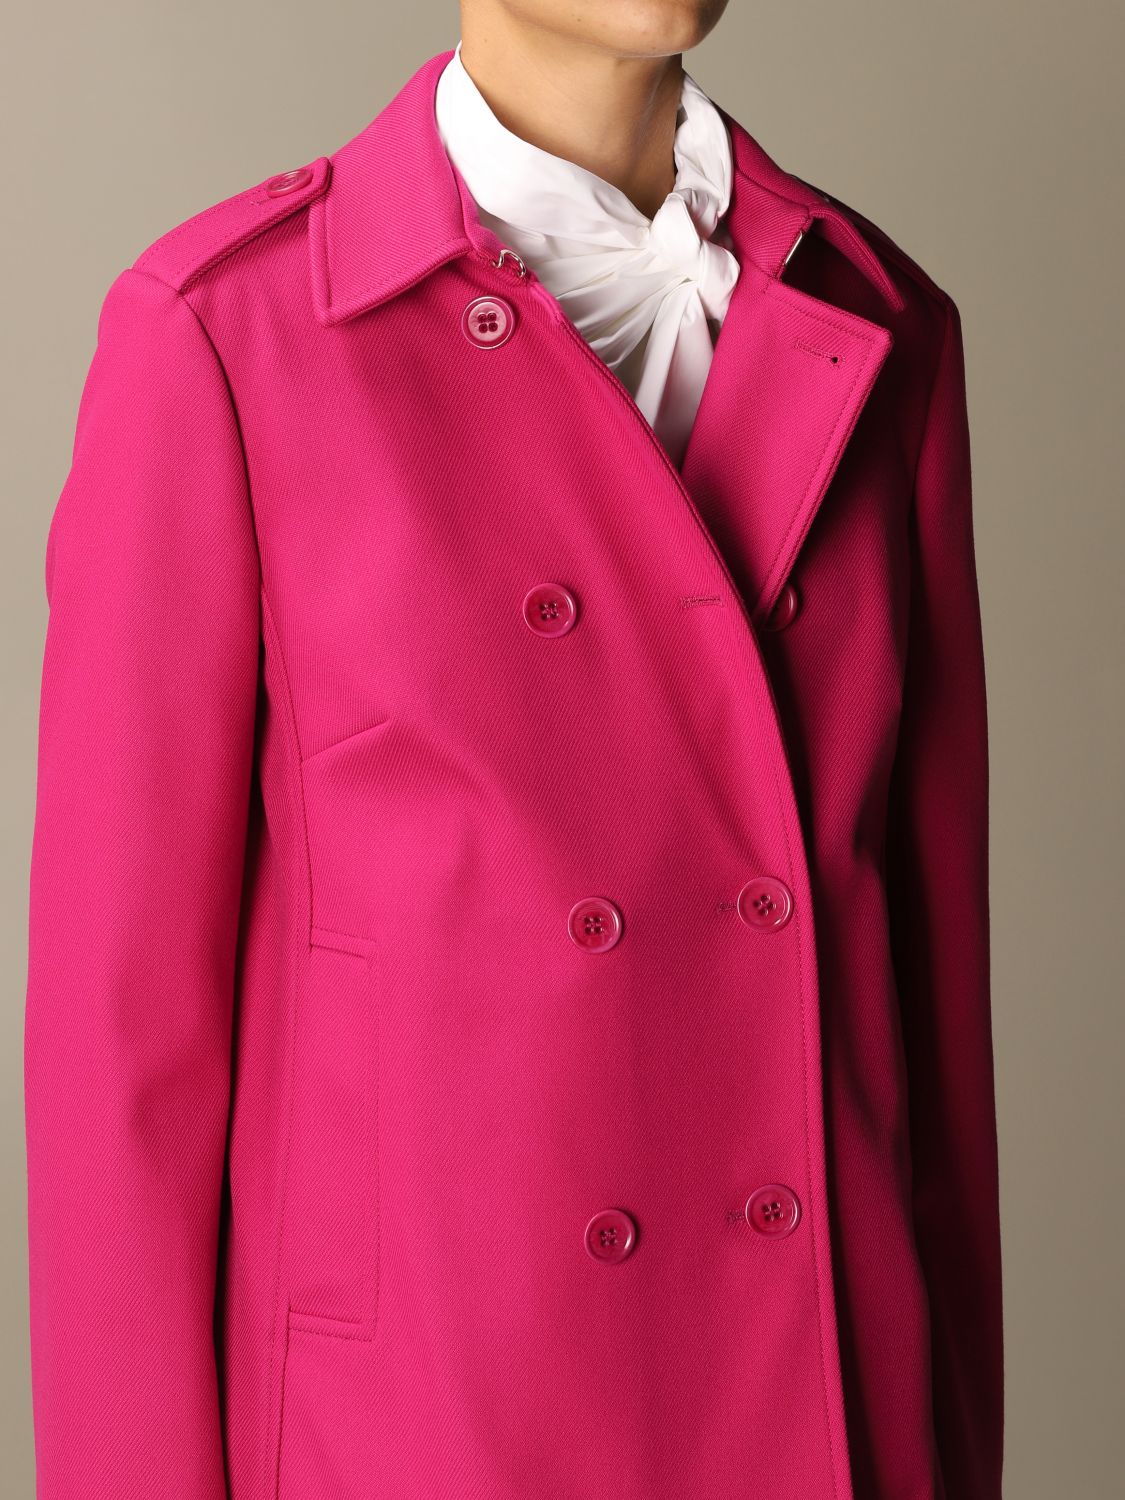 Red Valentino Outlet: double-breasted coat | Coat Valentino Pink | Coat Red Valentino UR3CAB951Y1 GIGLIO.COM